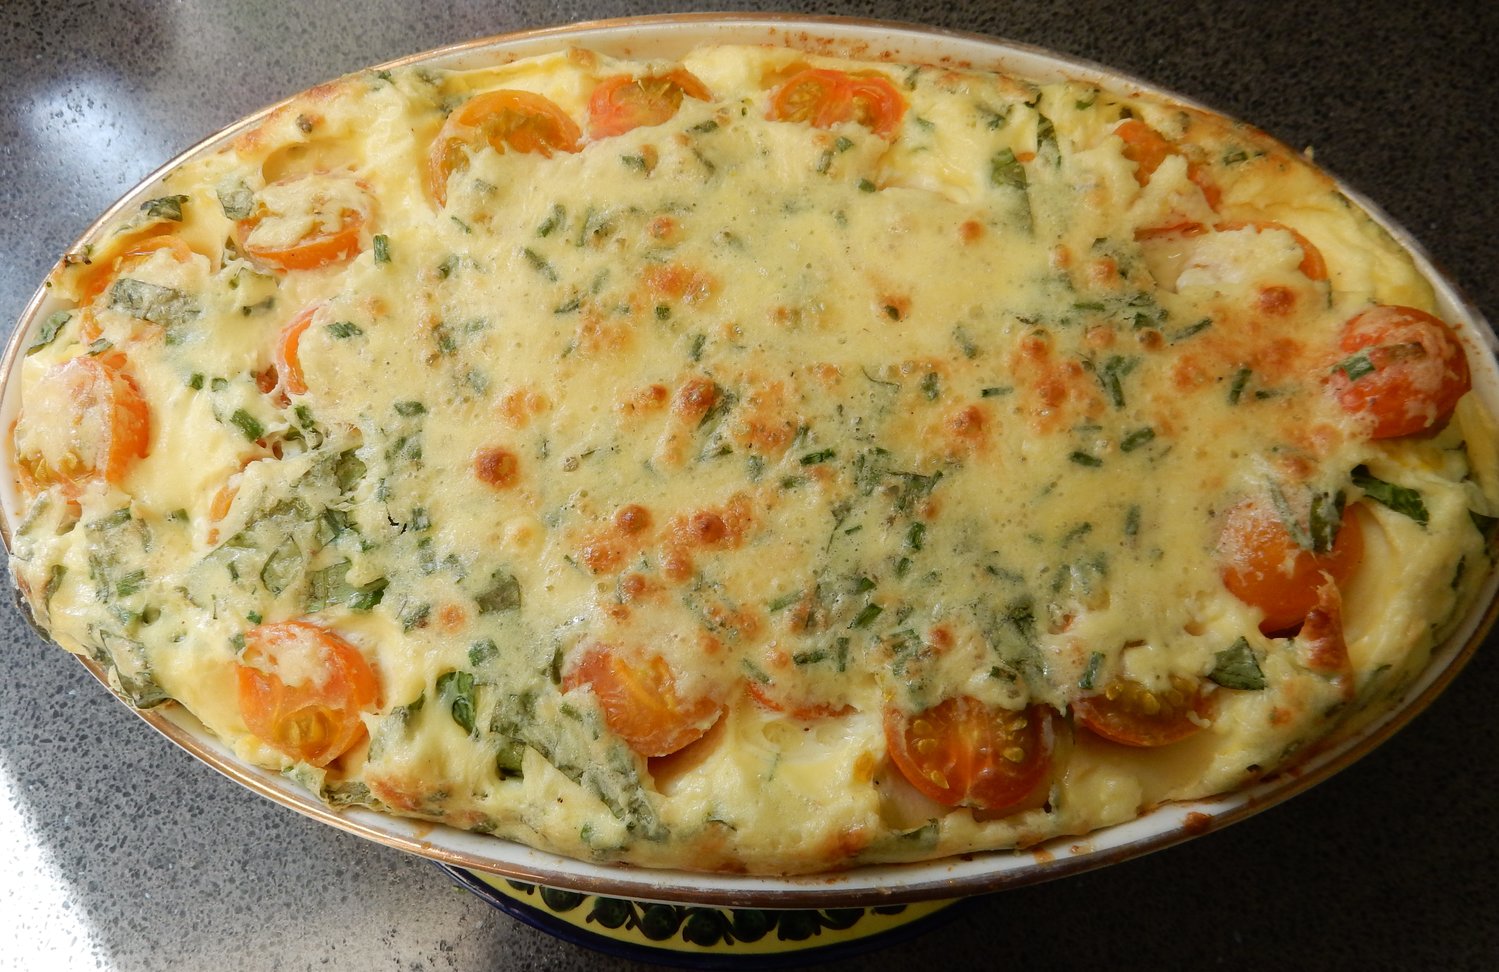 Tomato clafouti, a delicious part of a meal.